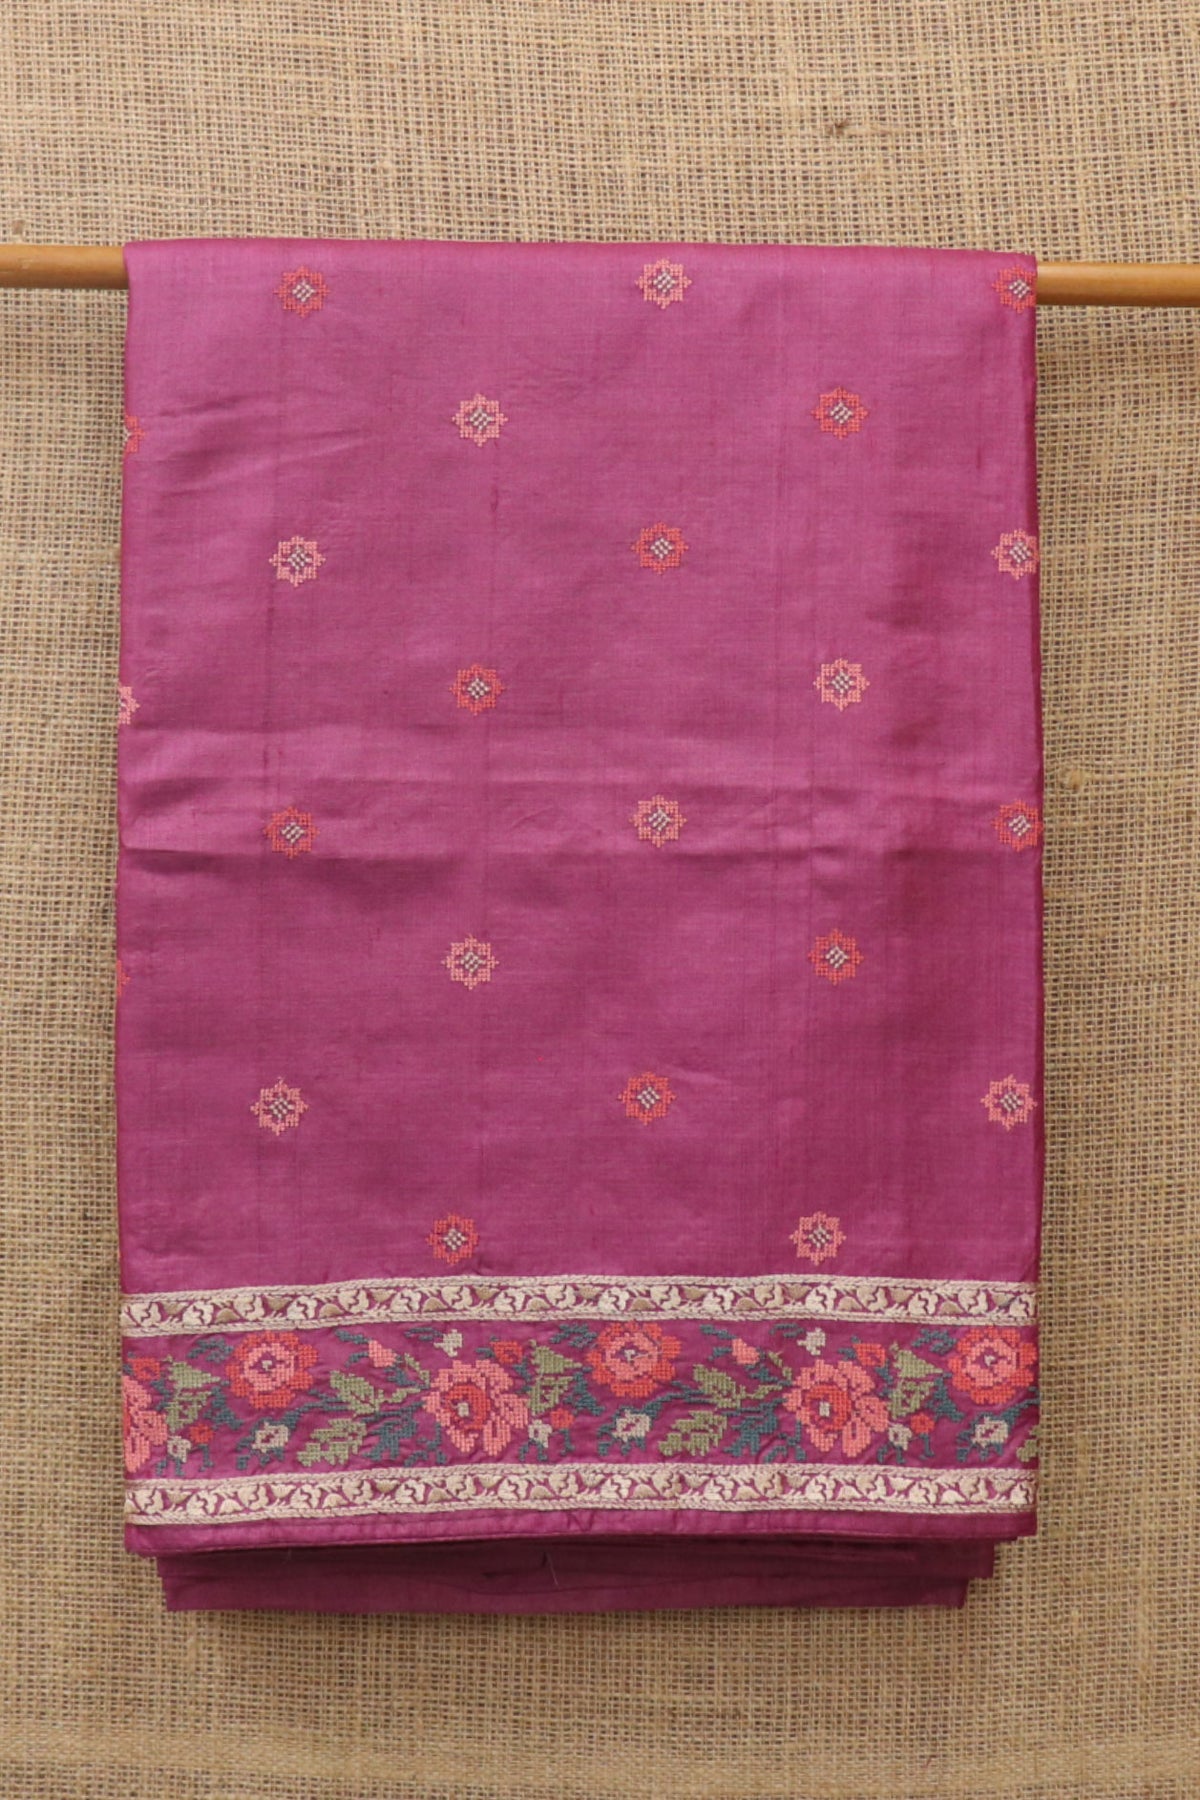 Embroidered Floral Border In Buttas Mauve Pink Tussar Silk Saree